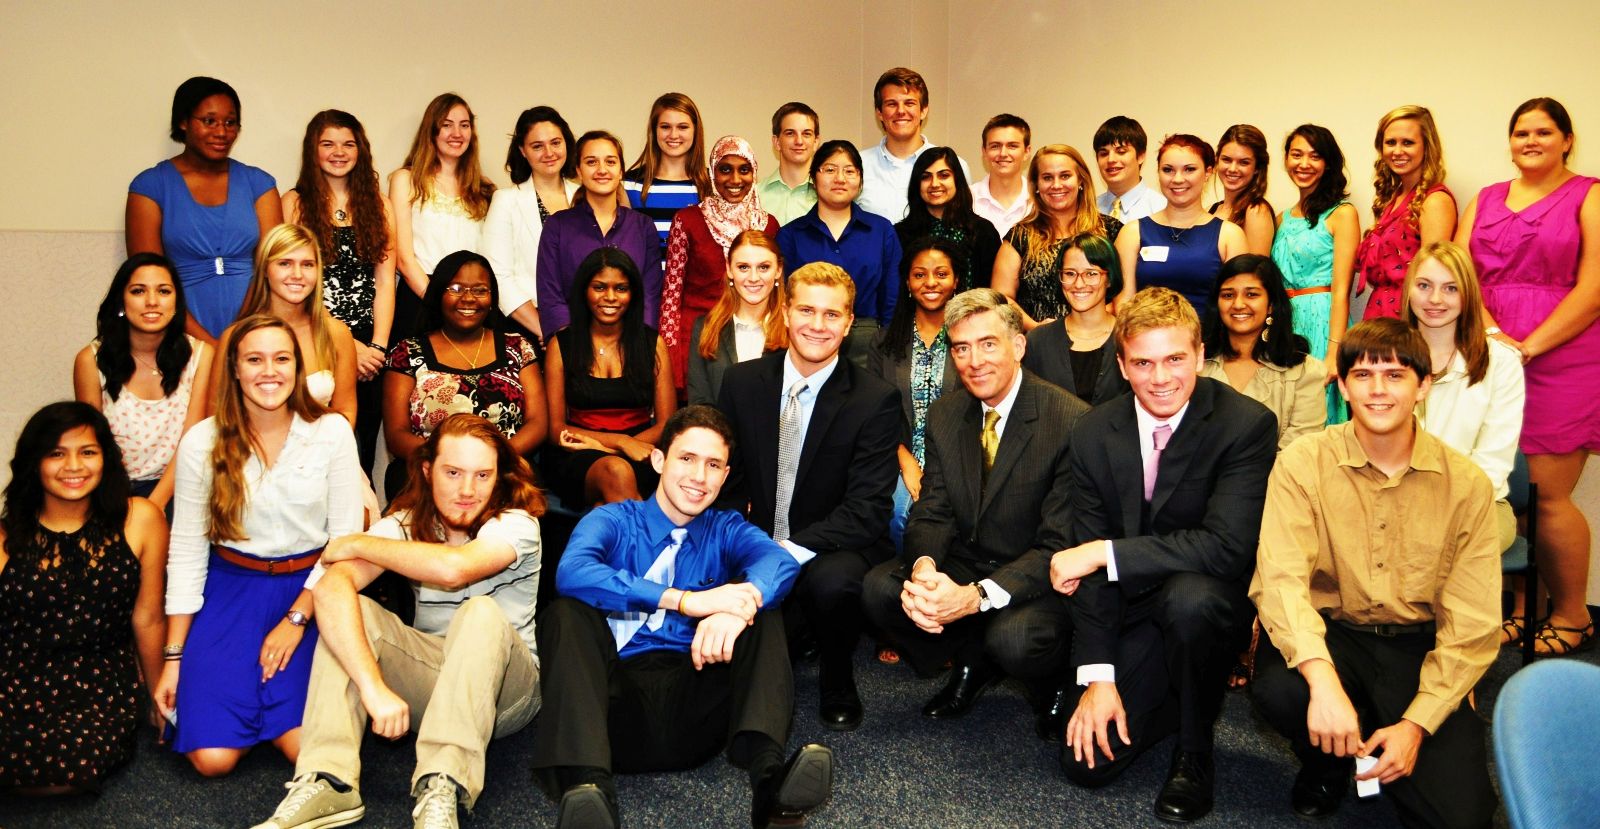 Students with then National Security Agency Deputy Director John "Chris" Inglis.